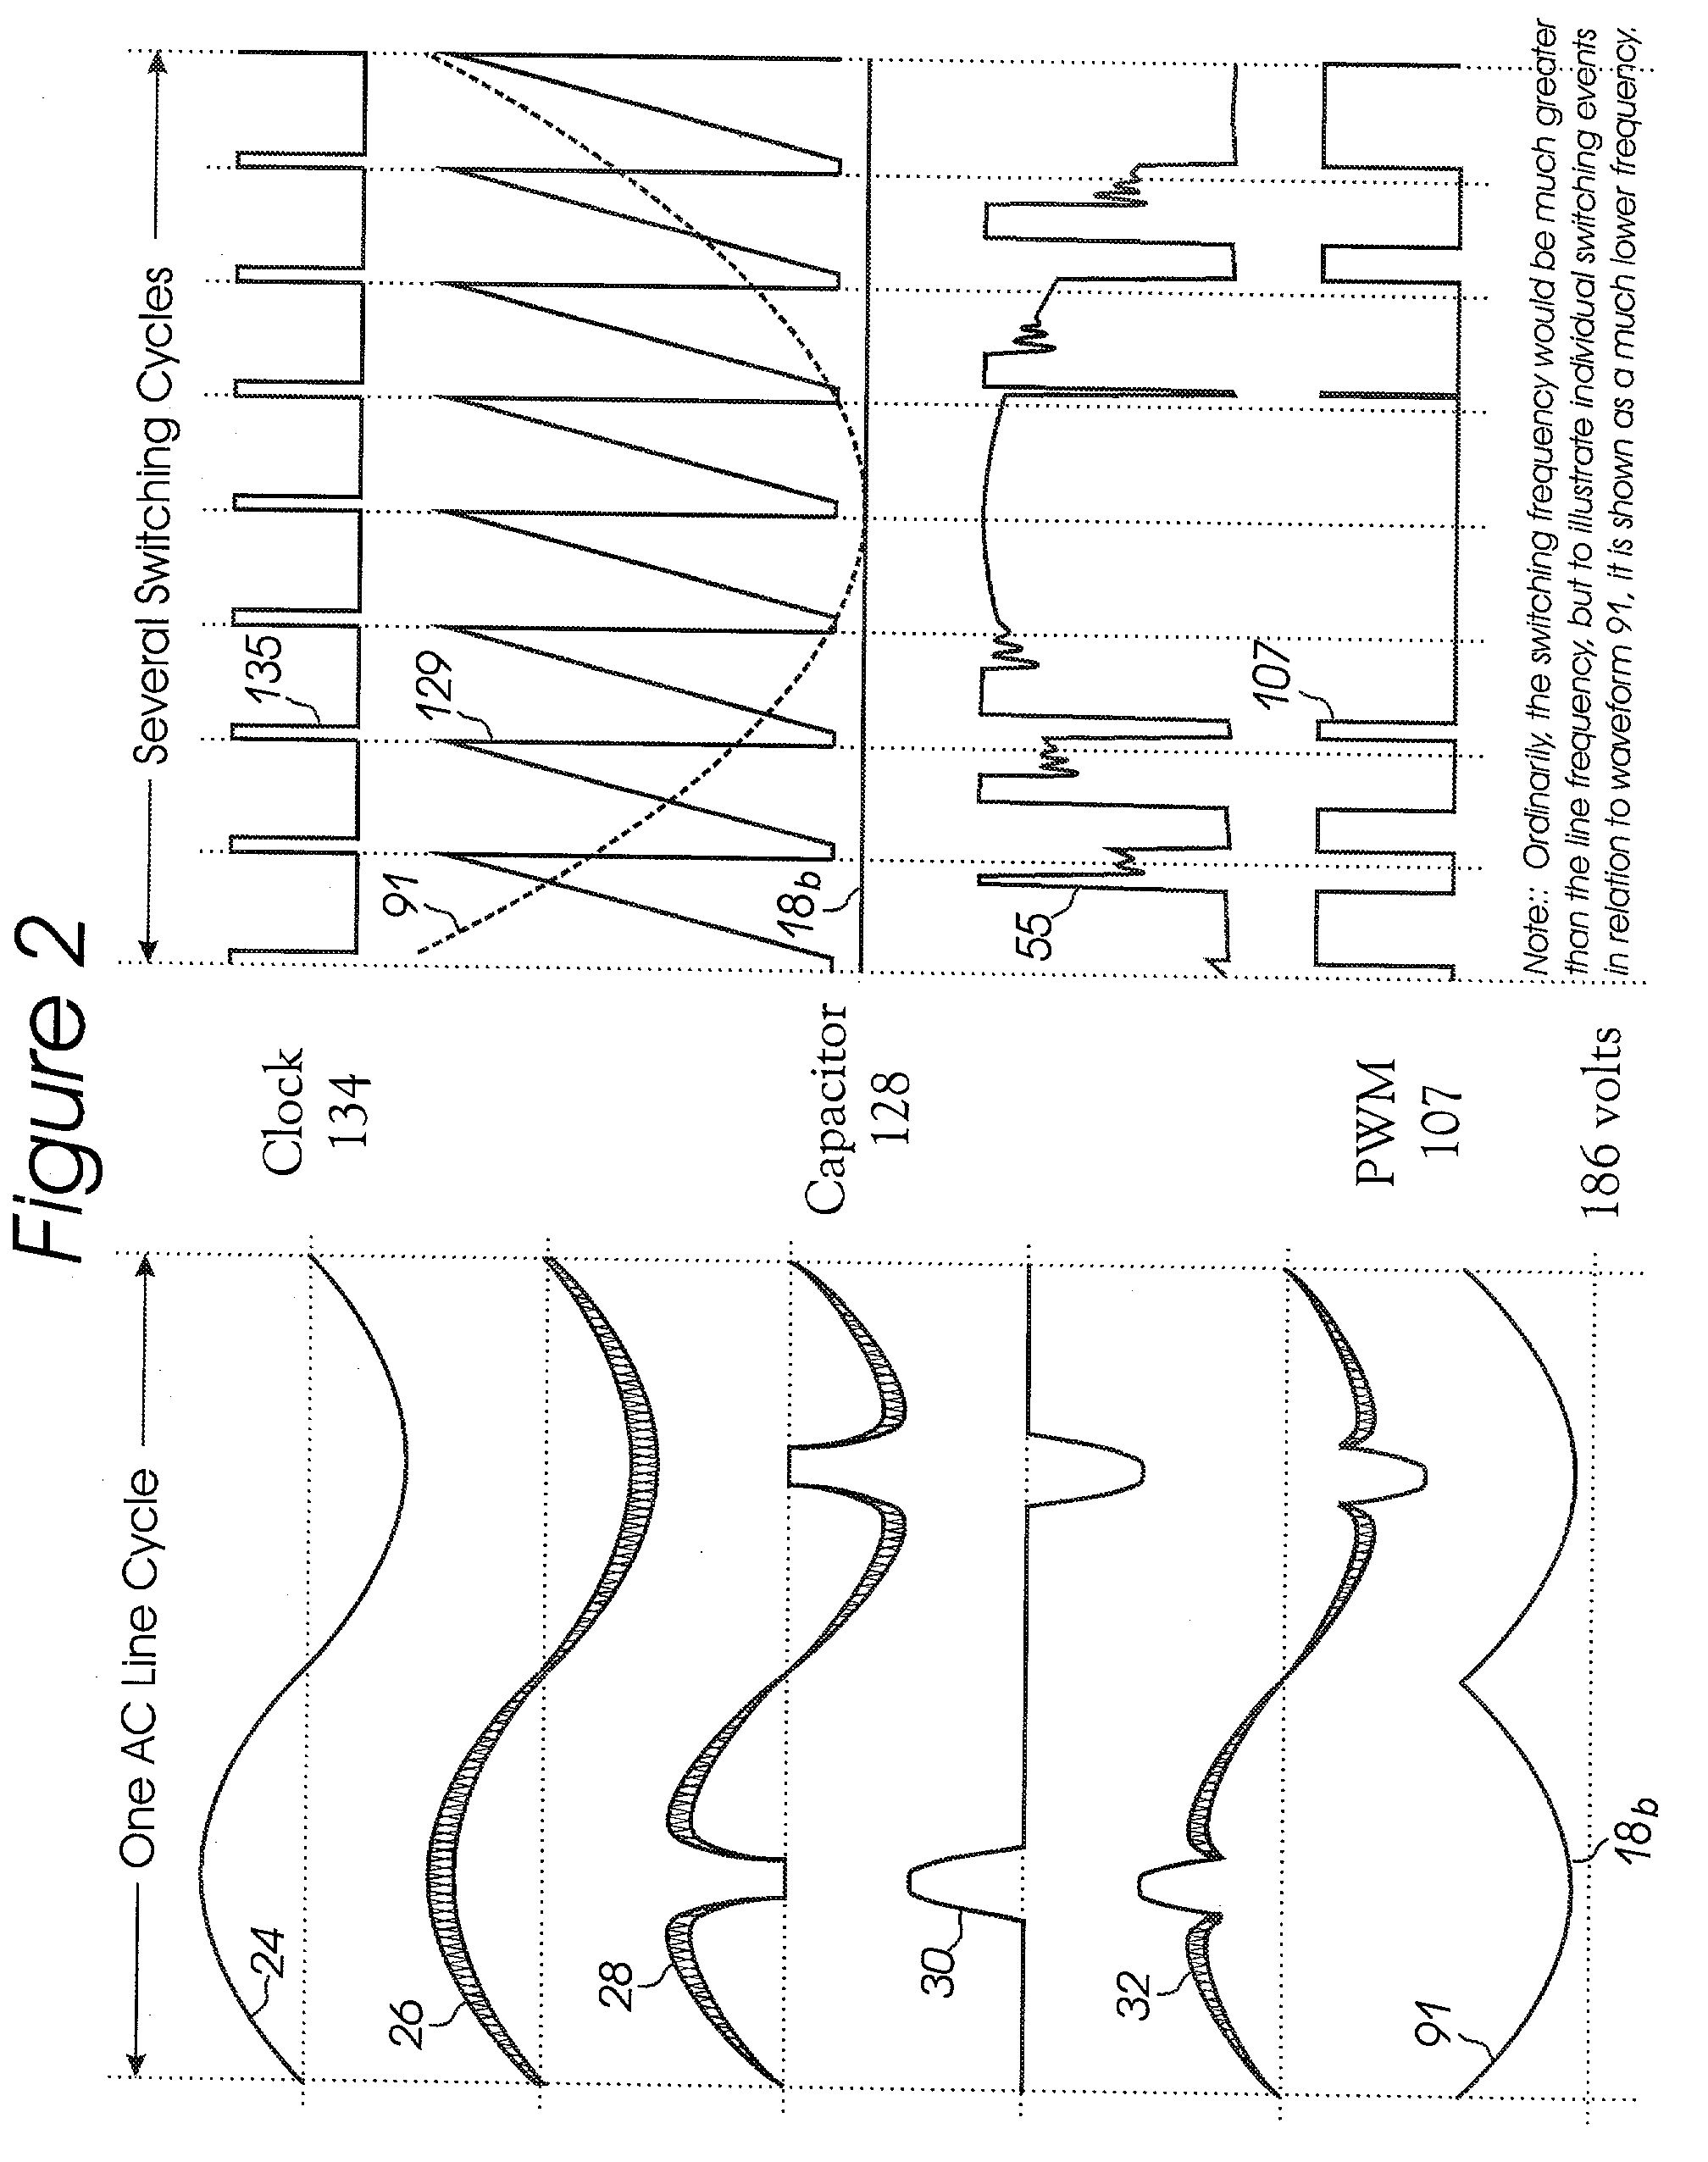 System and method for providing power factor correction